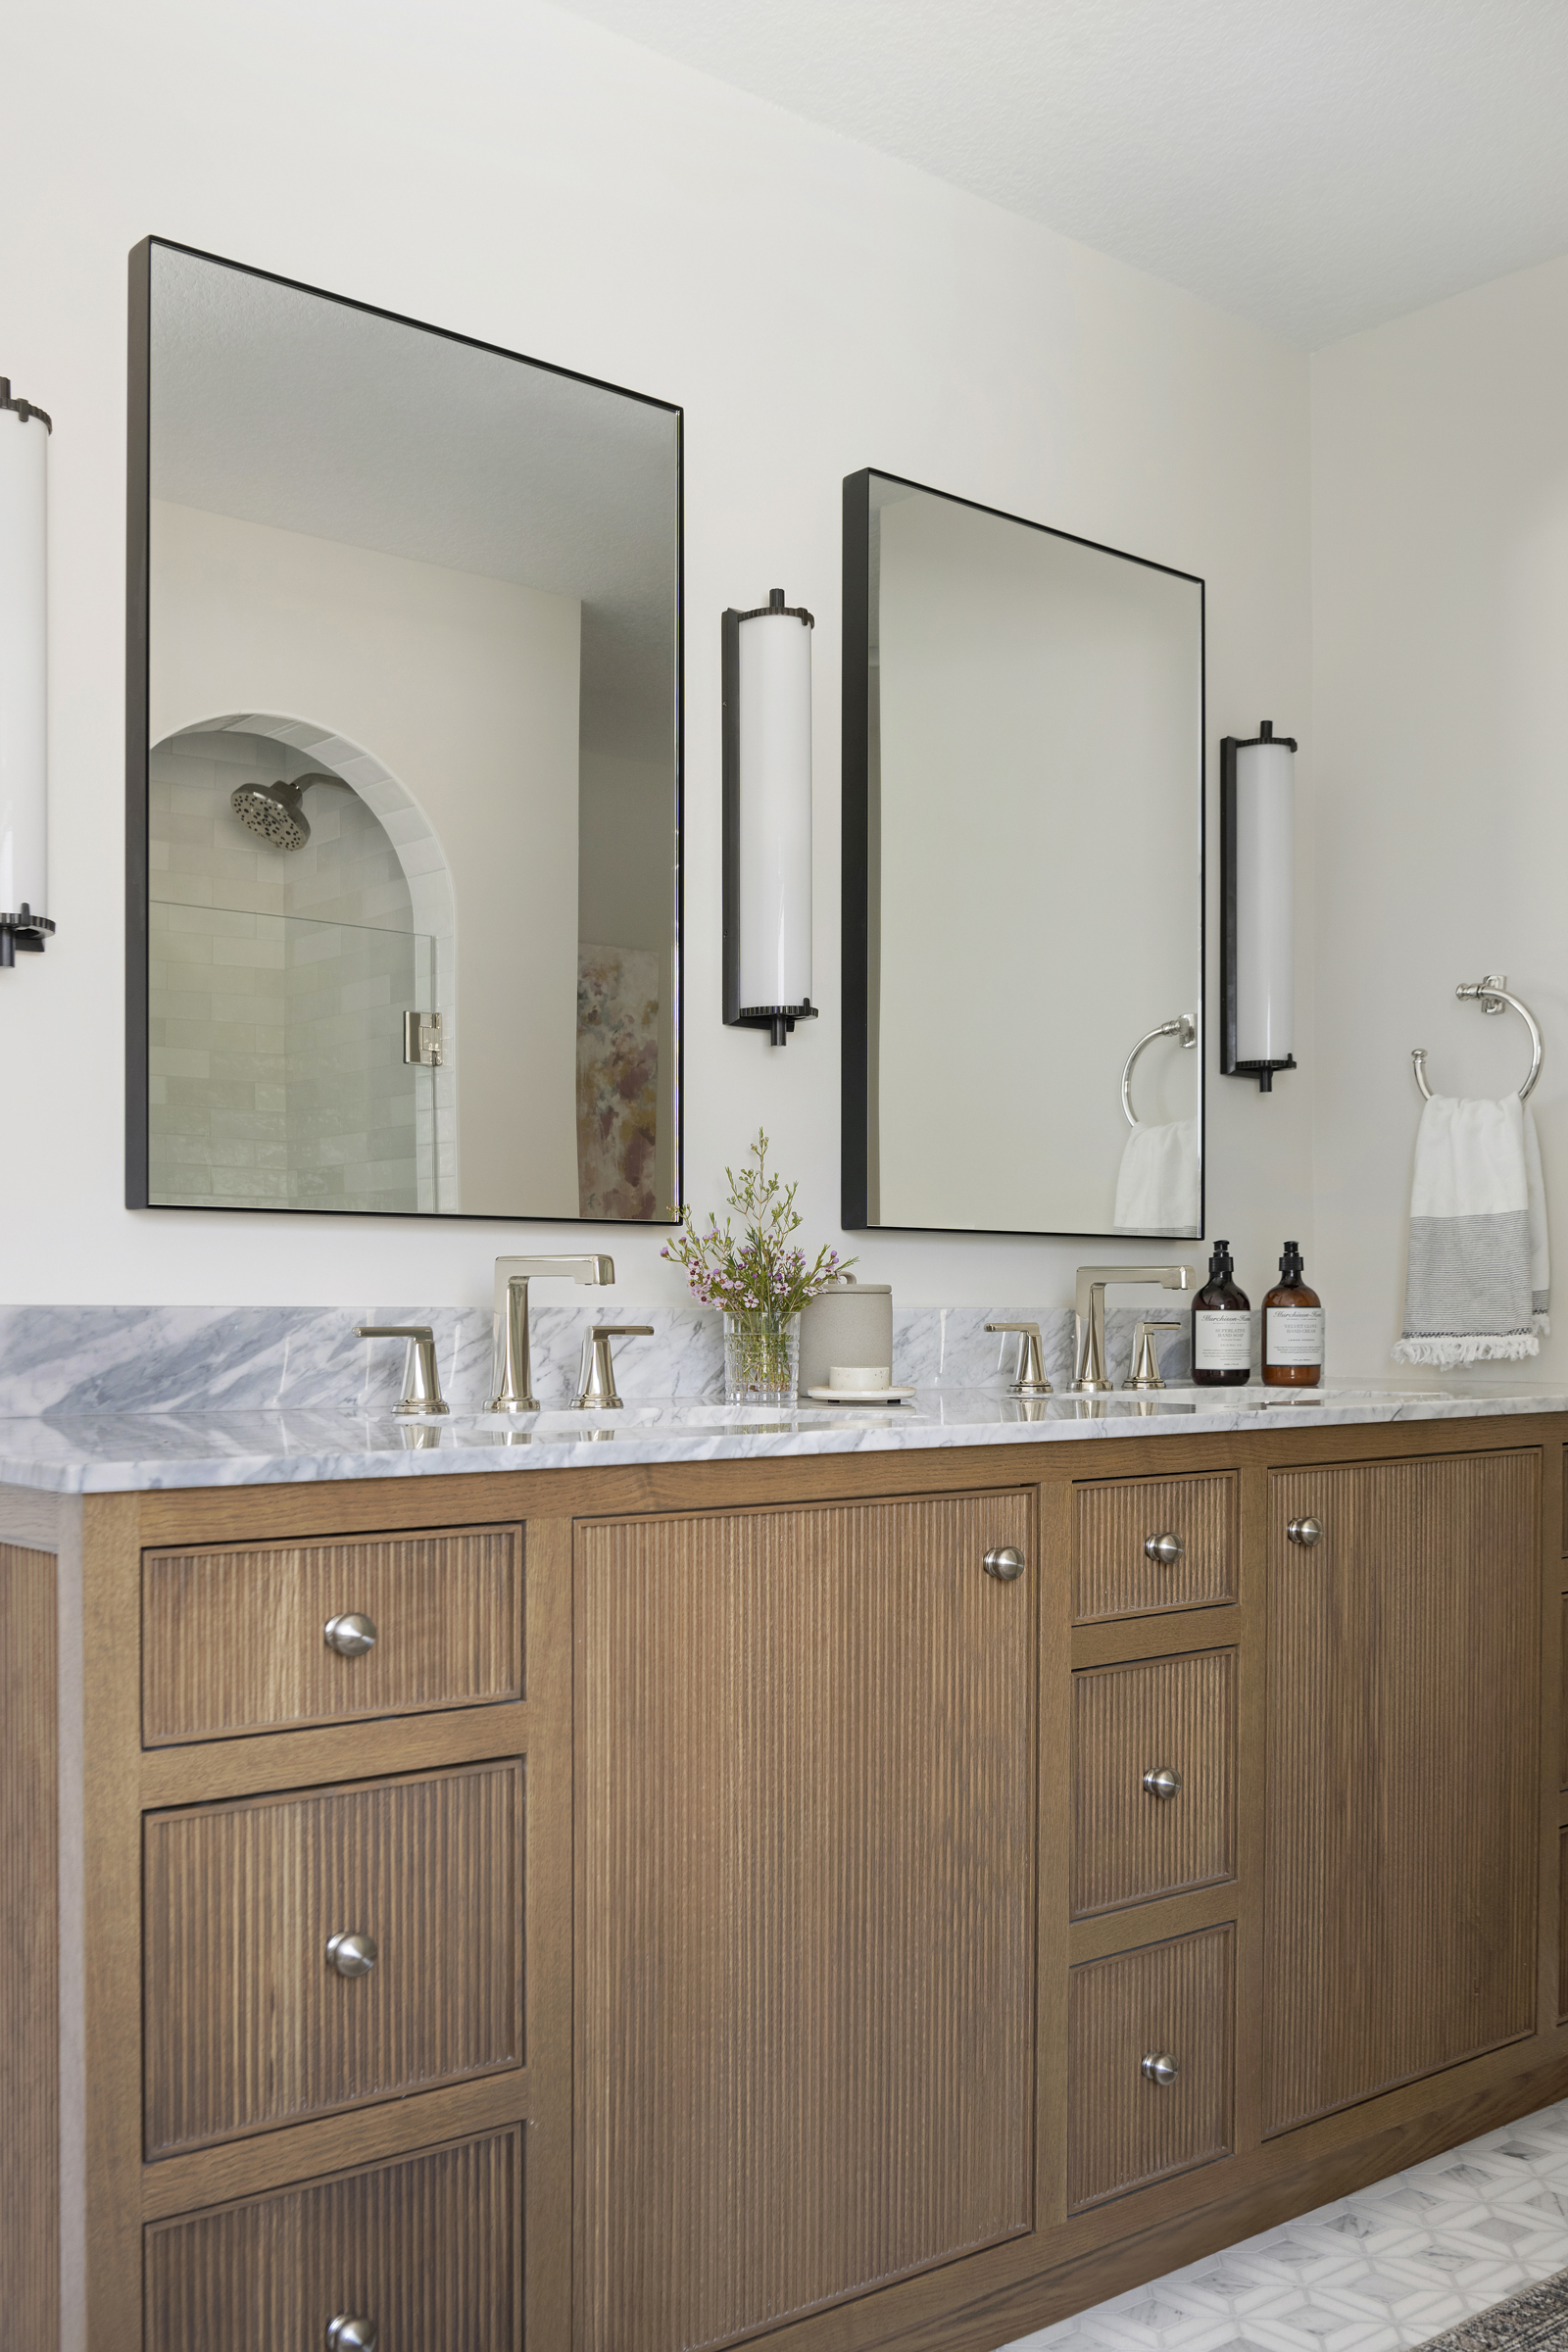 Twin Cities bathroom renovation with custom white oak readed vanity and marble countertops.